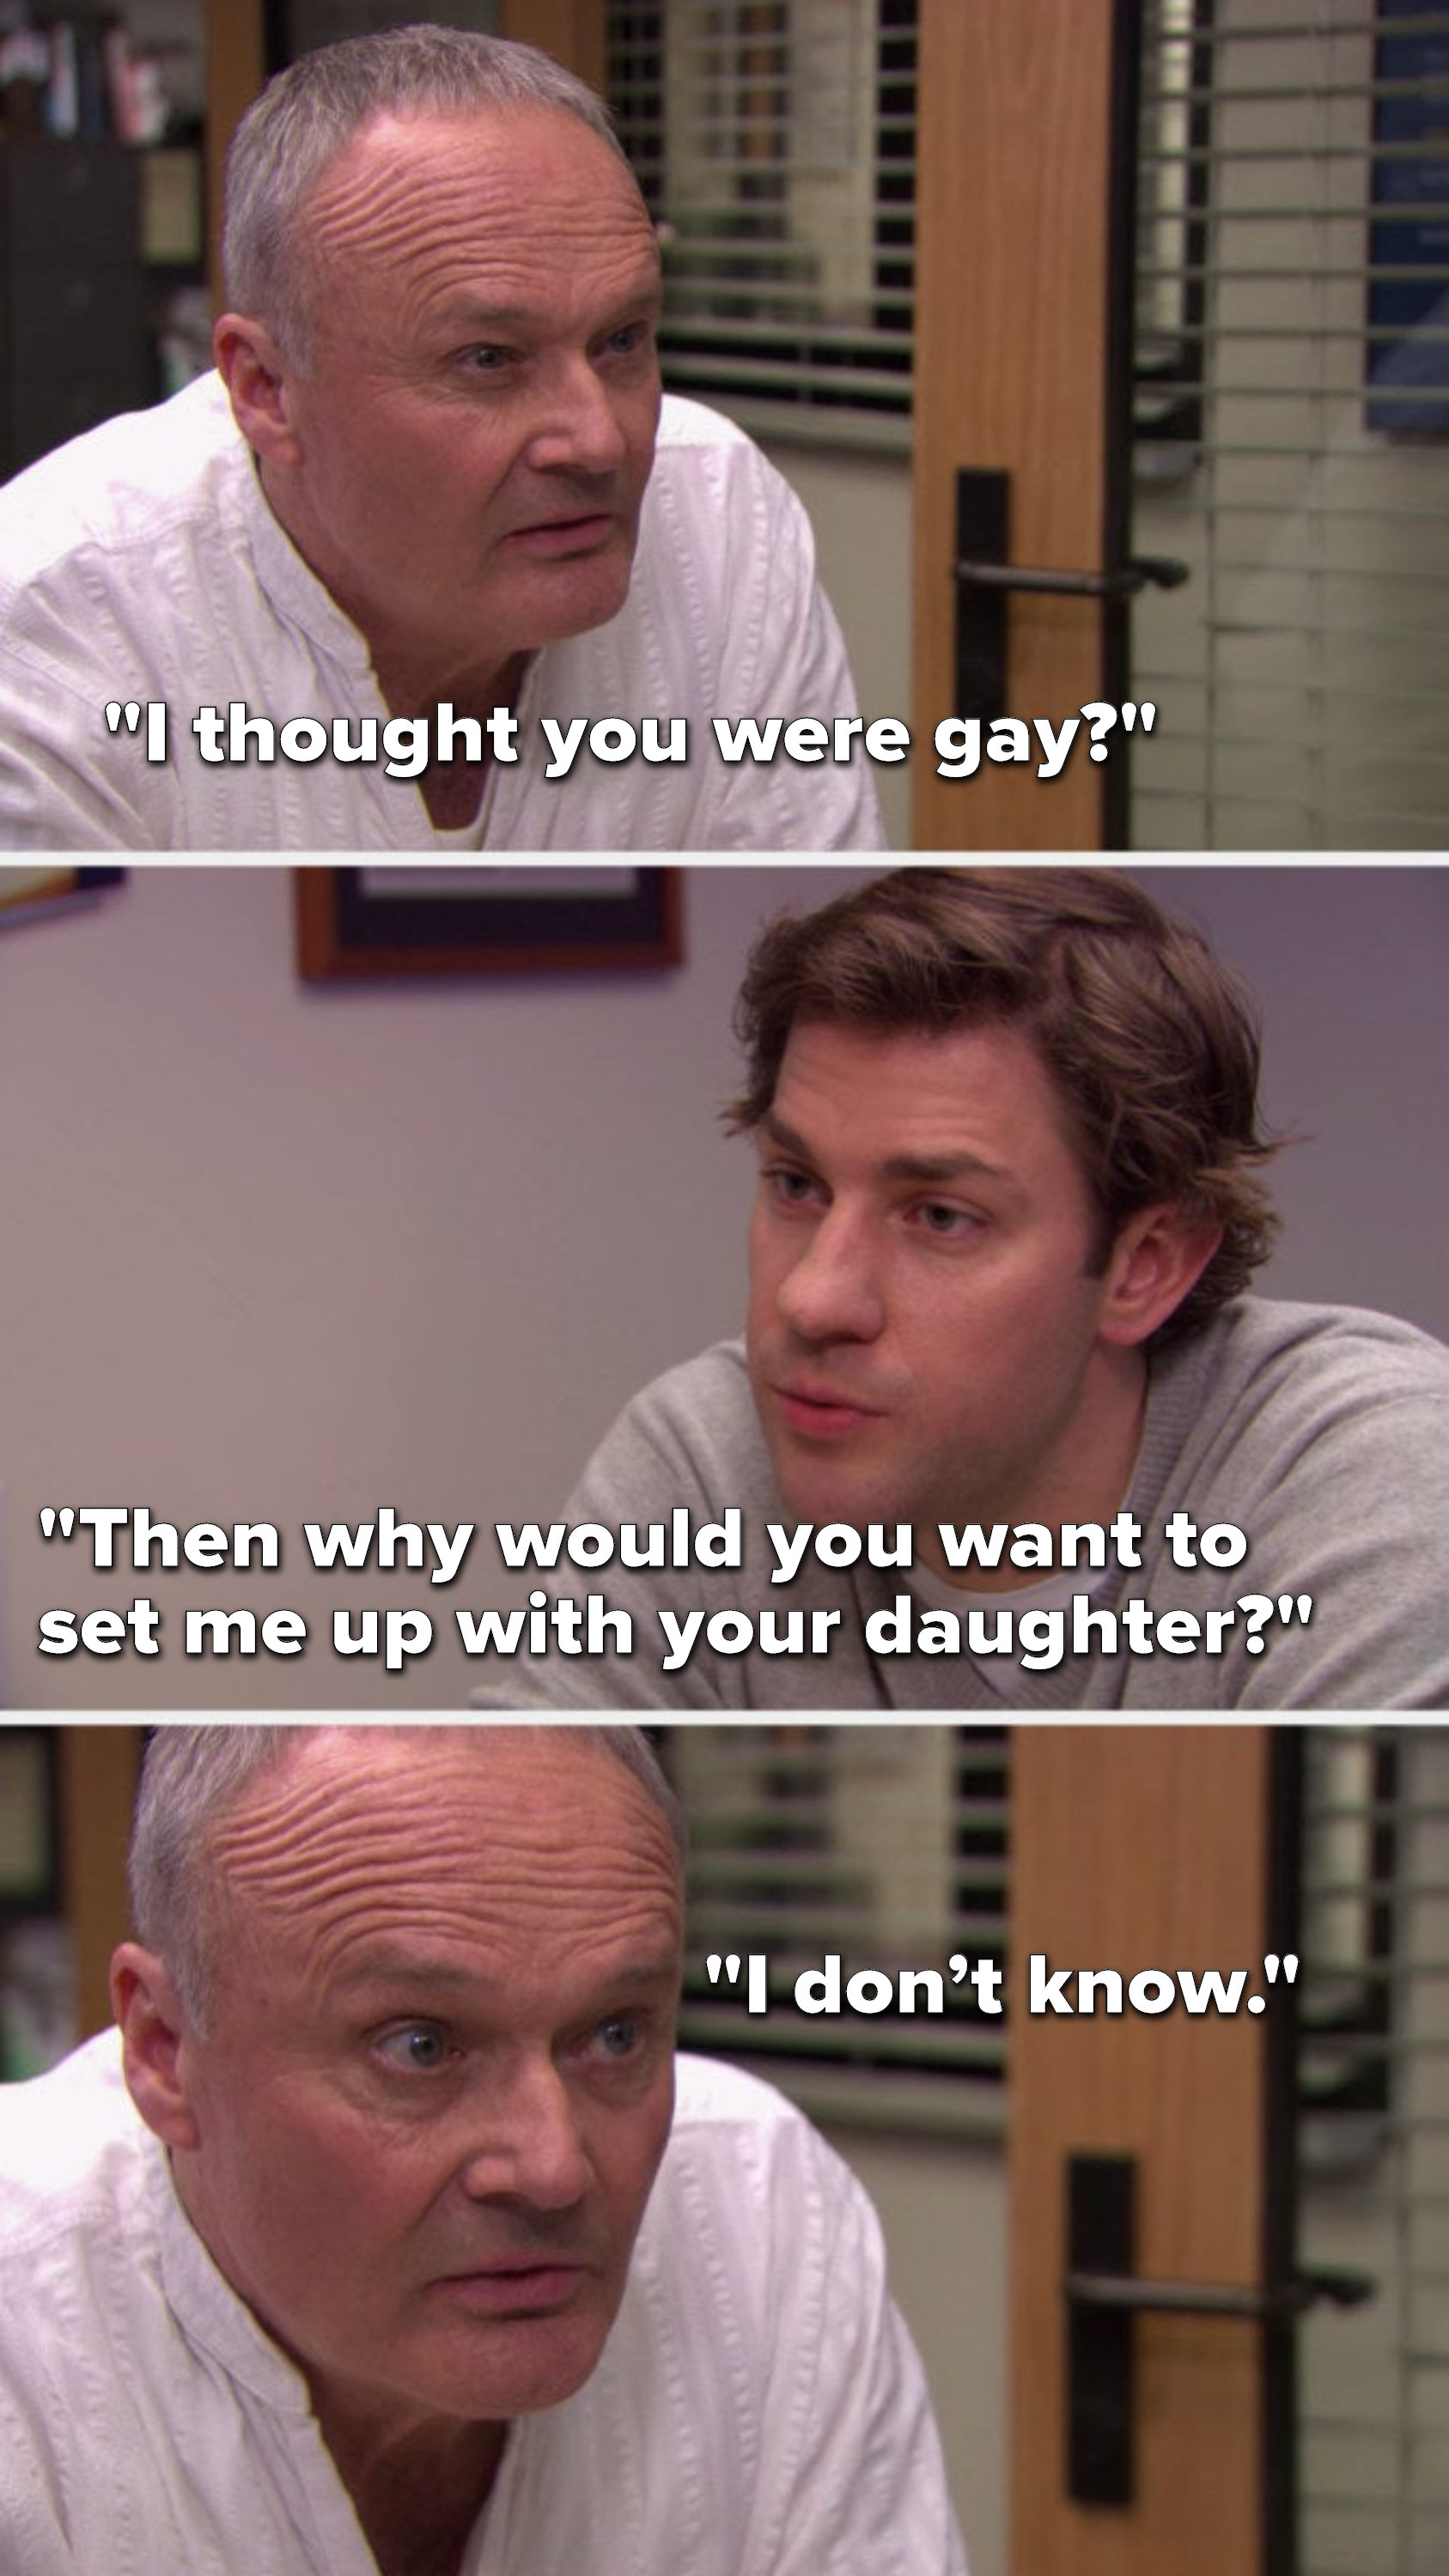 Creed says, &quot;I thought you were gay,&quot; Jim asks, &quot;Then why would you want to set me up with your daughter,&quot; and Creed says, &quot;I don’t know&quot;